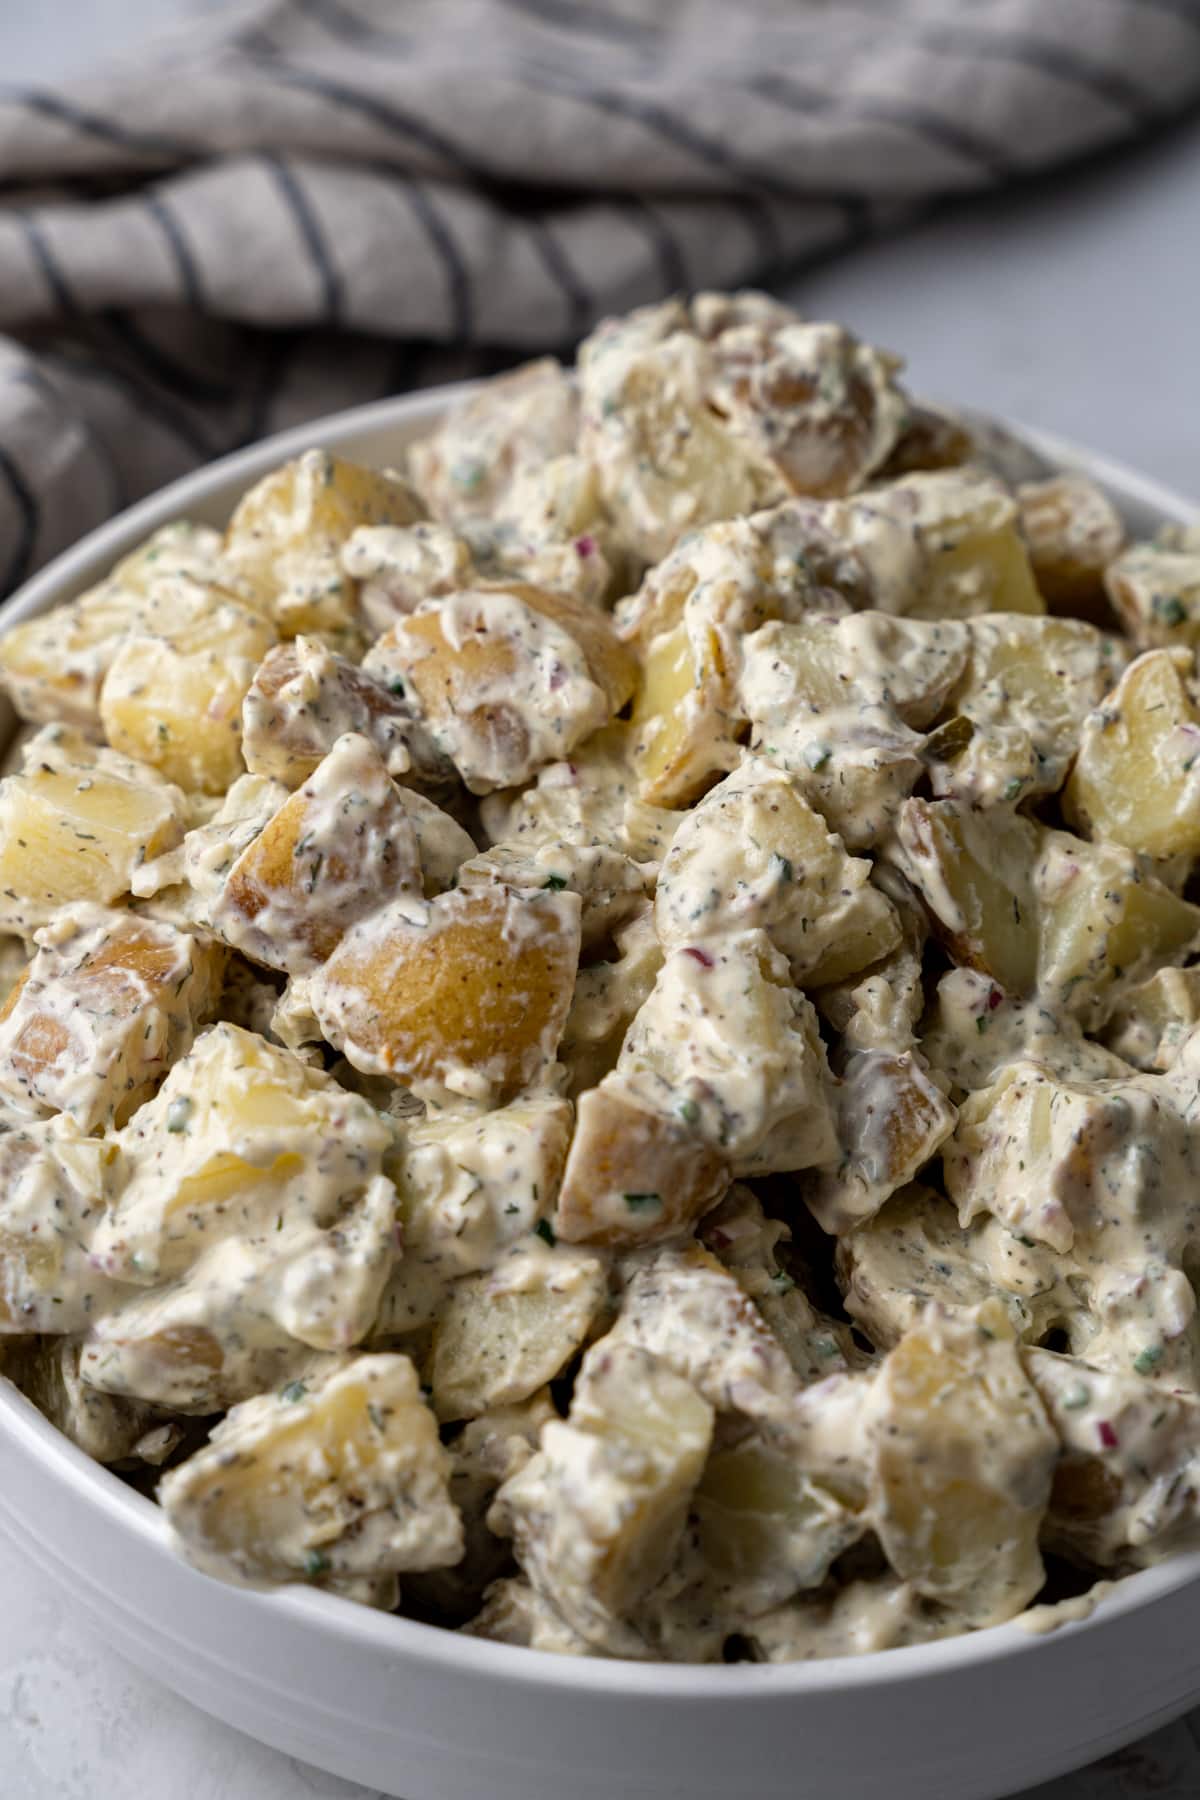 Potato salad piled high in a white bowl.